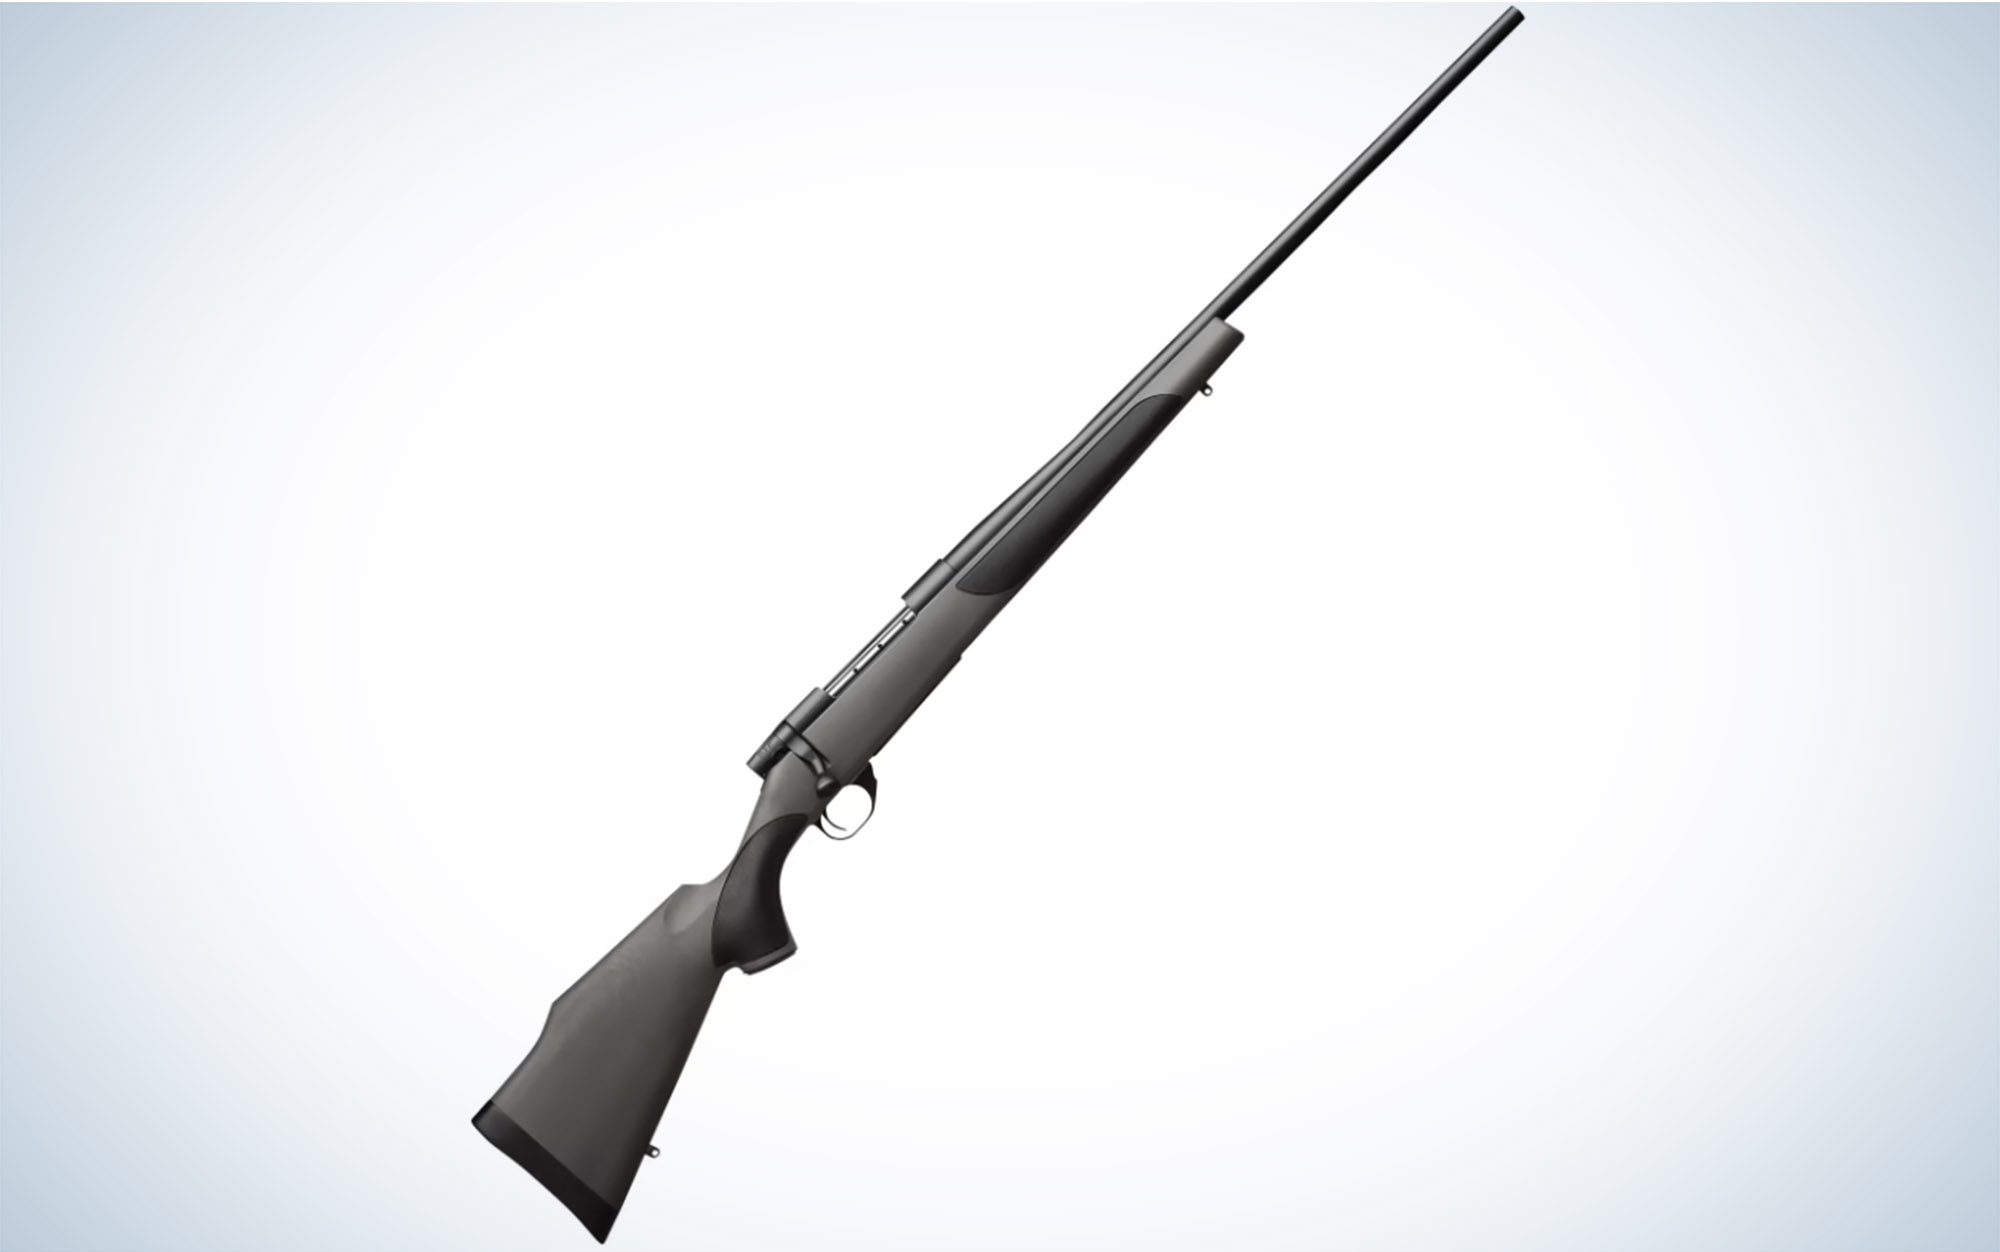 The Weatherby Vanguard is one of the best guns for hog hunting.